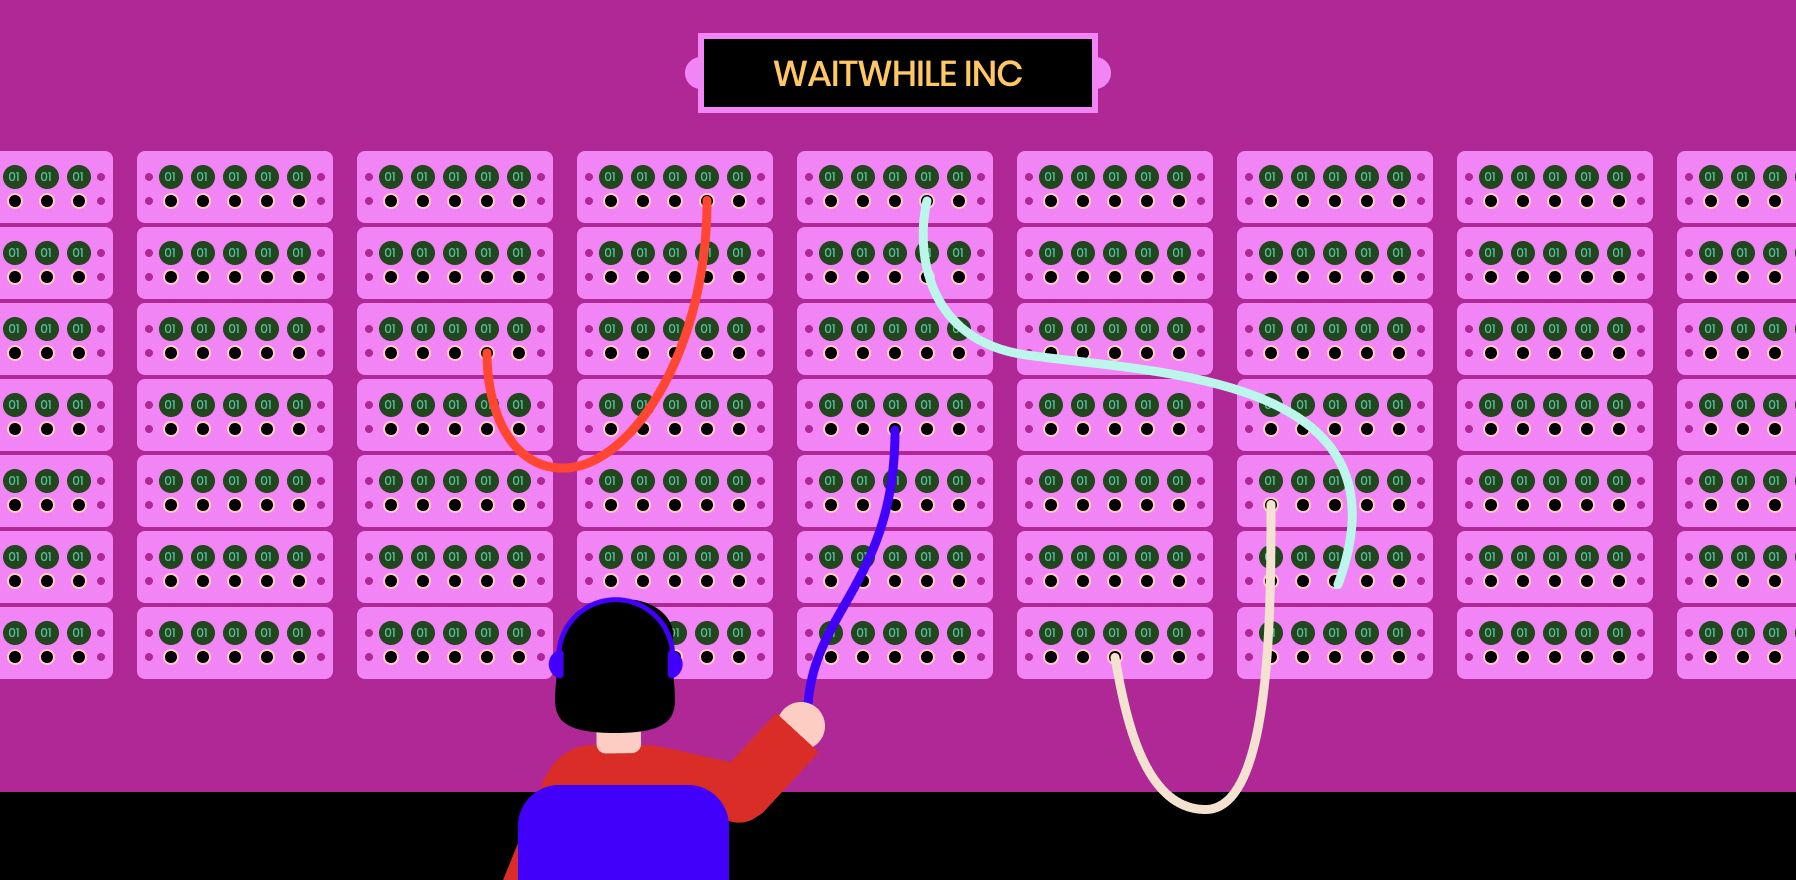 waitwhile queuing theory switchboard